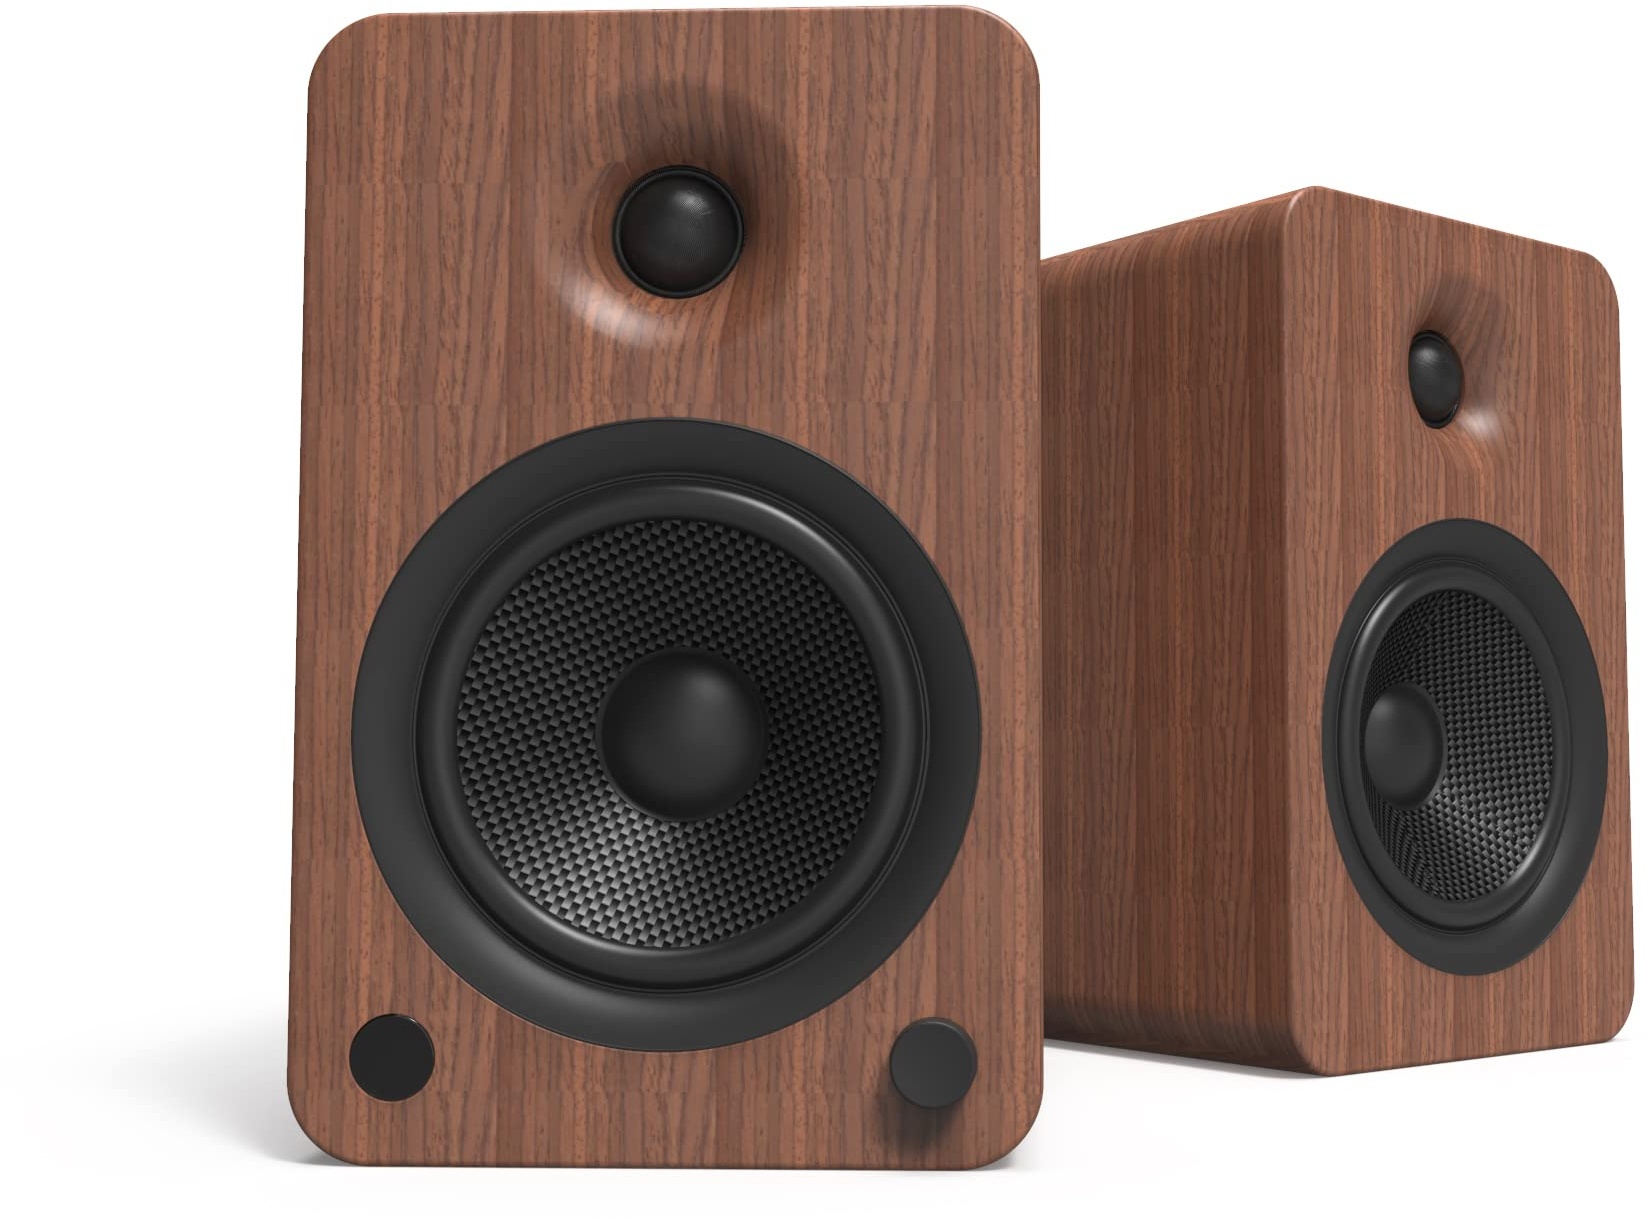 Kanto YU6WALNUT Powered Speakers with Bluetooth | Built-in Phono Preamp | 200W Peak Power | 1" Silk Dome Tweeter and 5.25" Kevlar Driver | Auto Standby and Startup | Remote Included | Pair | Walnut